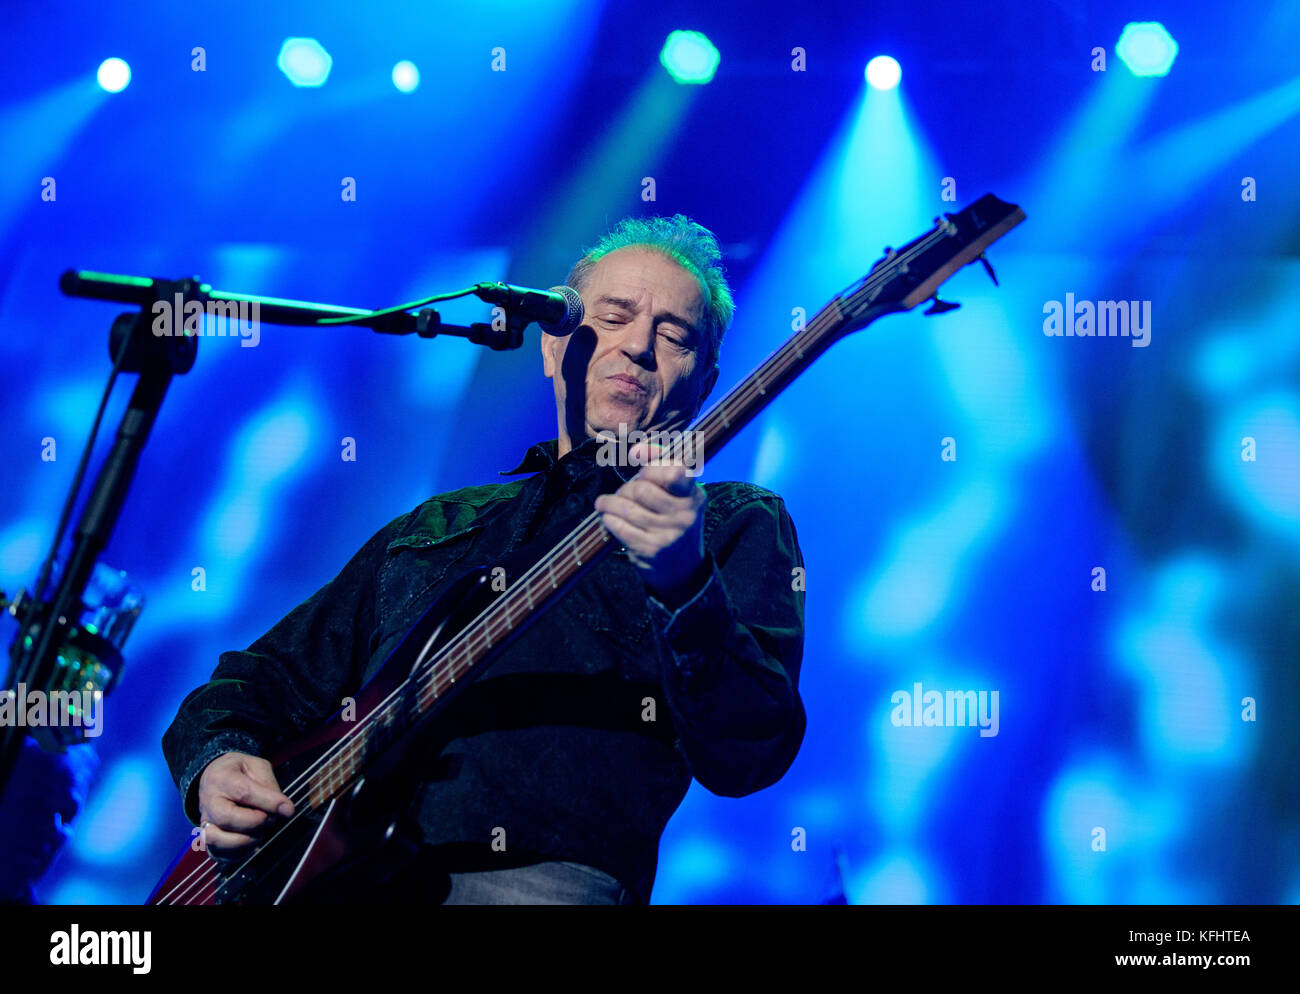 Munich, Germany. 29th Oct, 2017. Singer and bass player Guenther Sigl performs in the course of the anniversary concert of the Spider Murphy Gang in the Olympiahalle in Munich, Germany, 29 October 2017. The Spider Murphy Gang celebrates its 40th stage anniversary with the concert. Credit: Matthias Balk/dpa/Alamy Live News Stock Photo